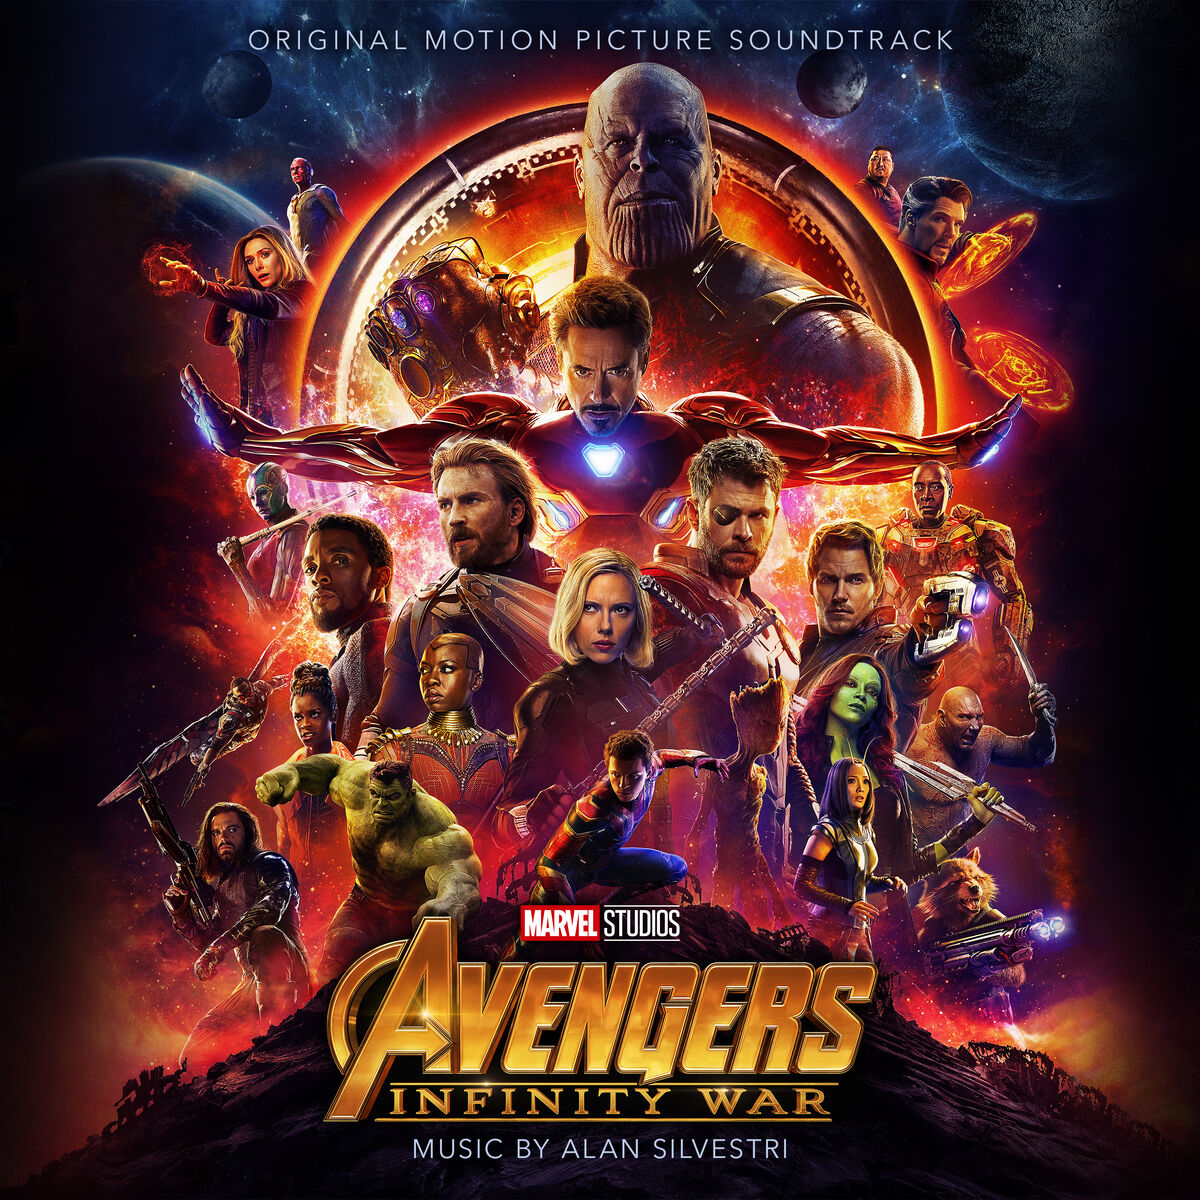 The Art of Avengers: Infinity War  Marvel Cinematic Universe Wiki